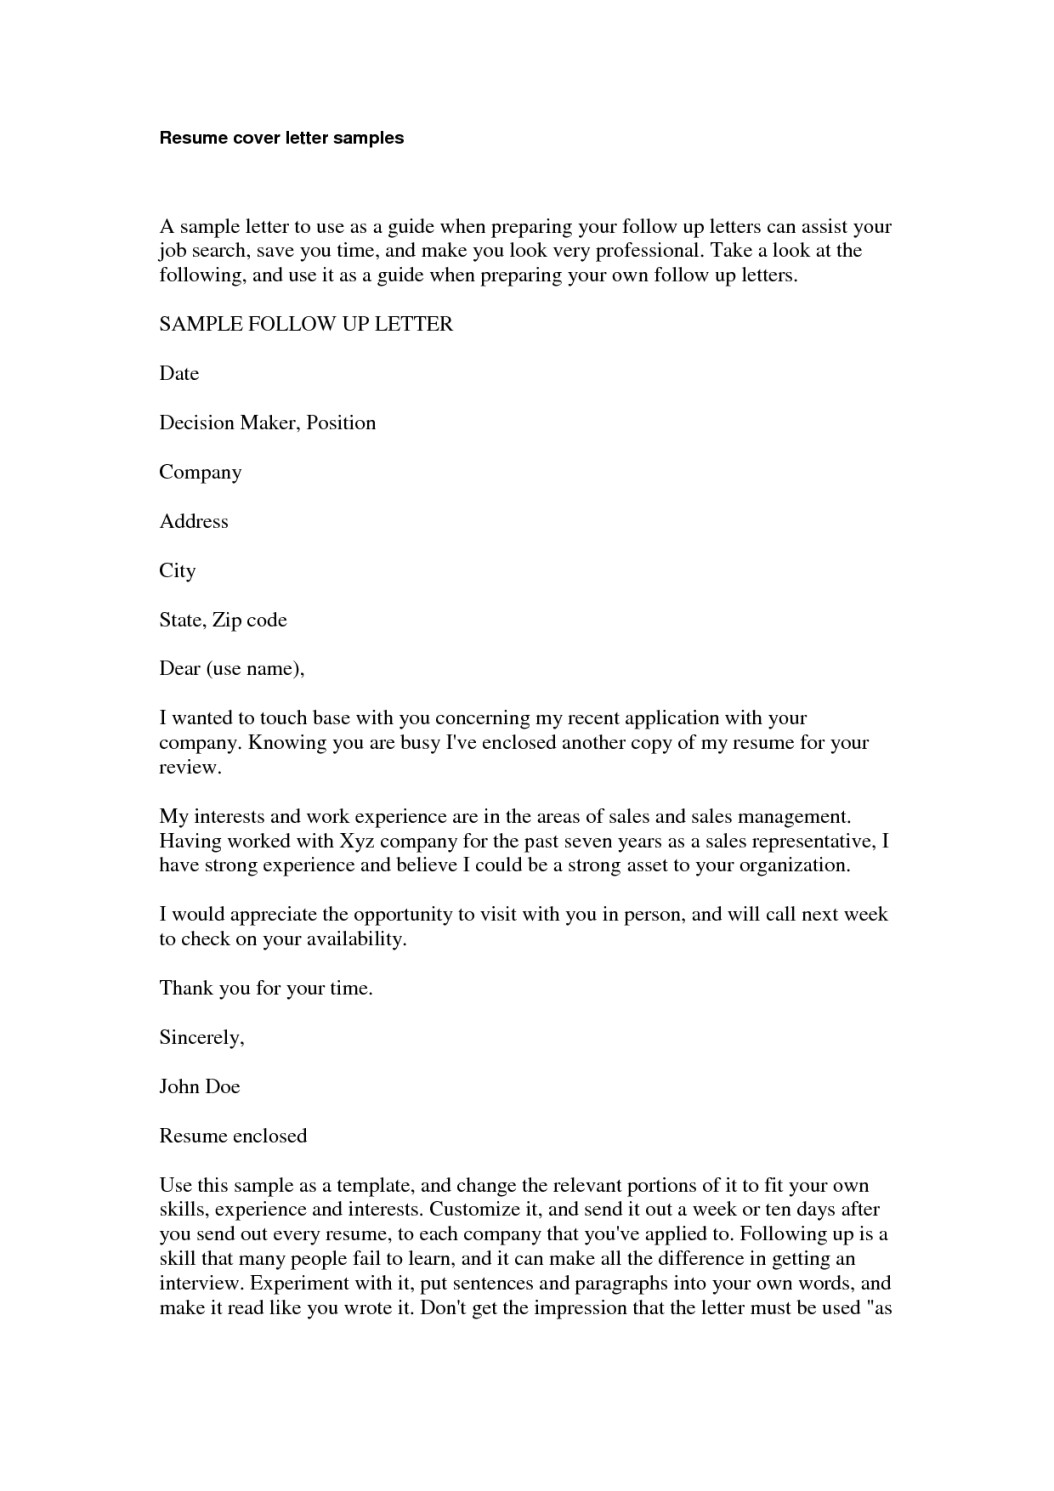 resume cover letter template 2017